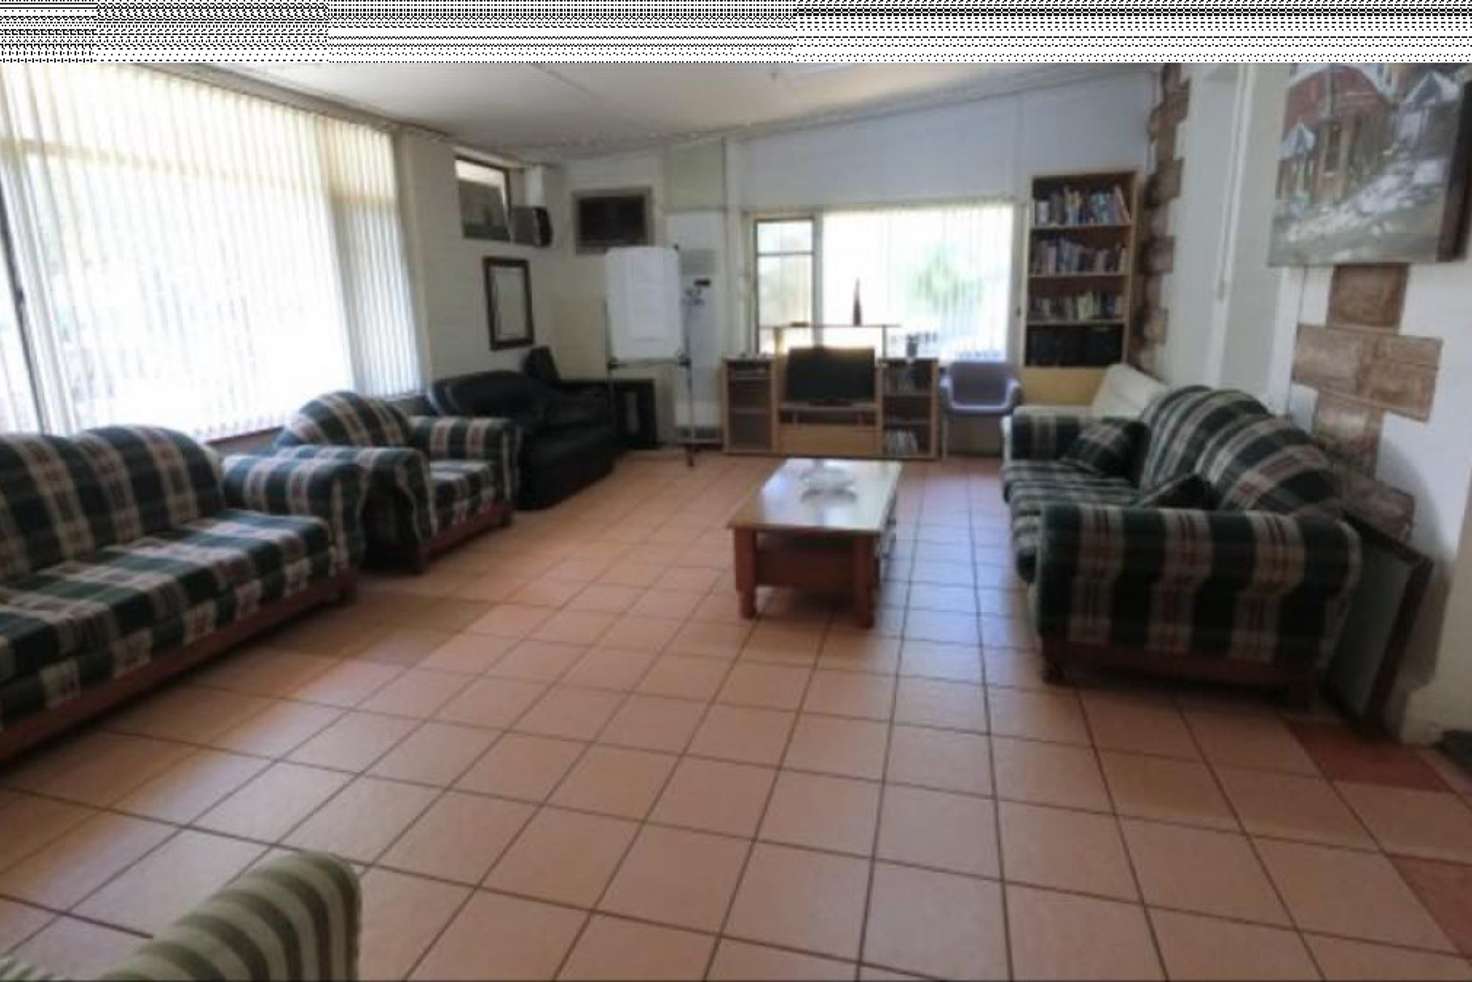 Main view of Homely house listing, 23 Edwards Street, South Brighton SA 5048